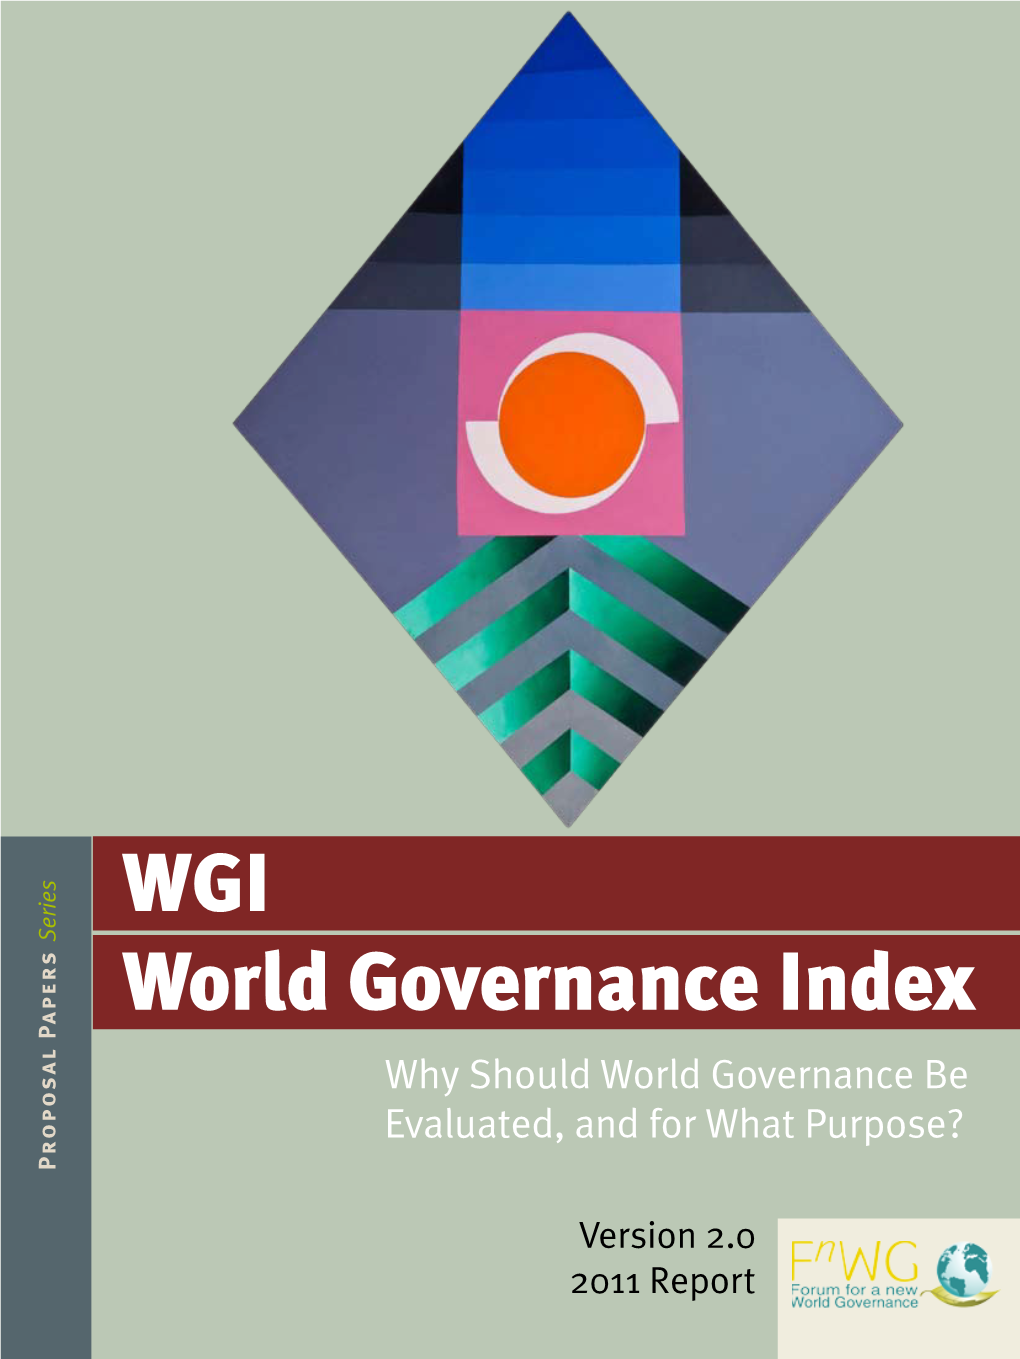 WGI World Governance Index Why Should World Governance Be Evaluated, and for What Purpose? Proposal Papers Series Papers Proposal